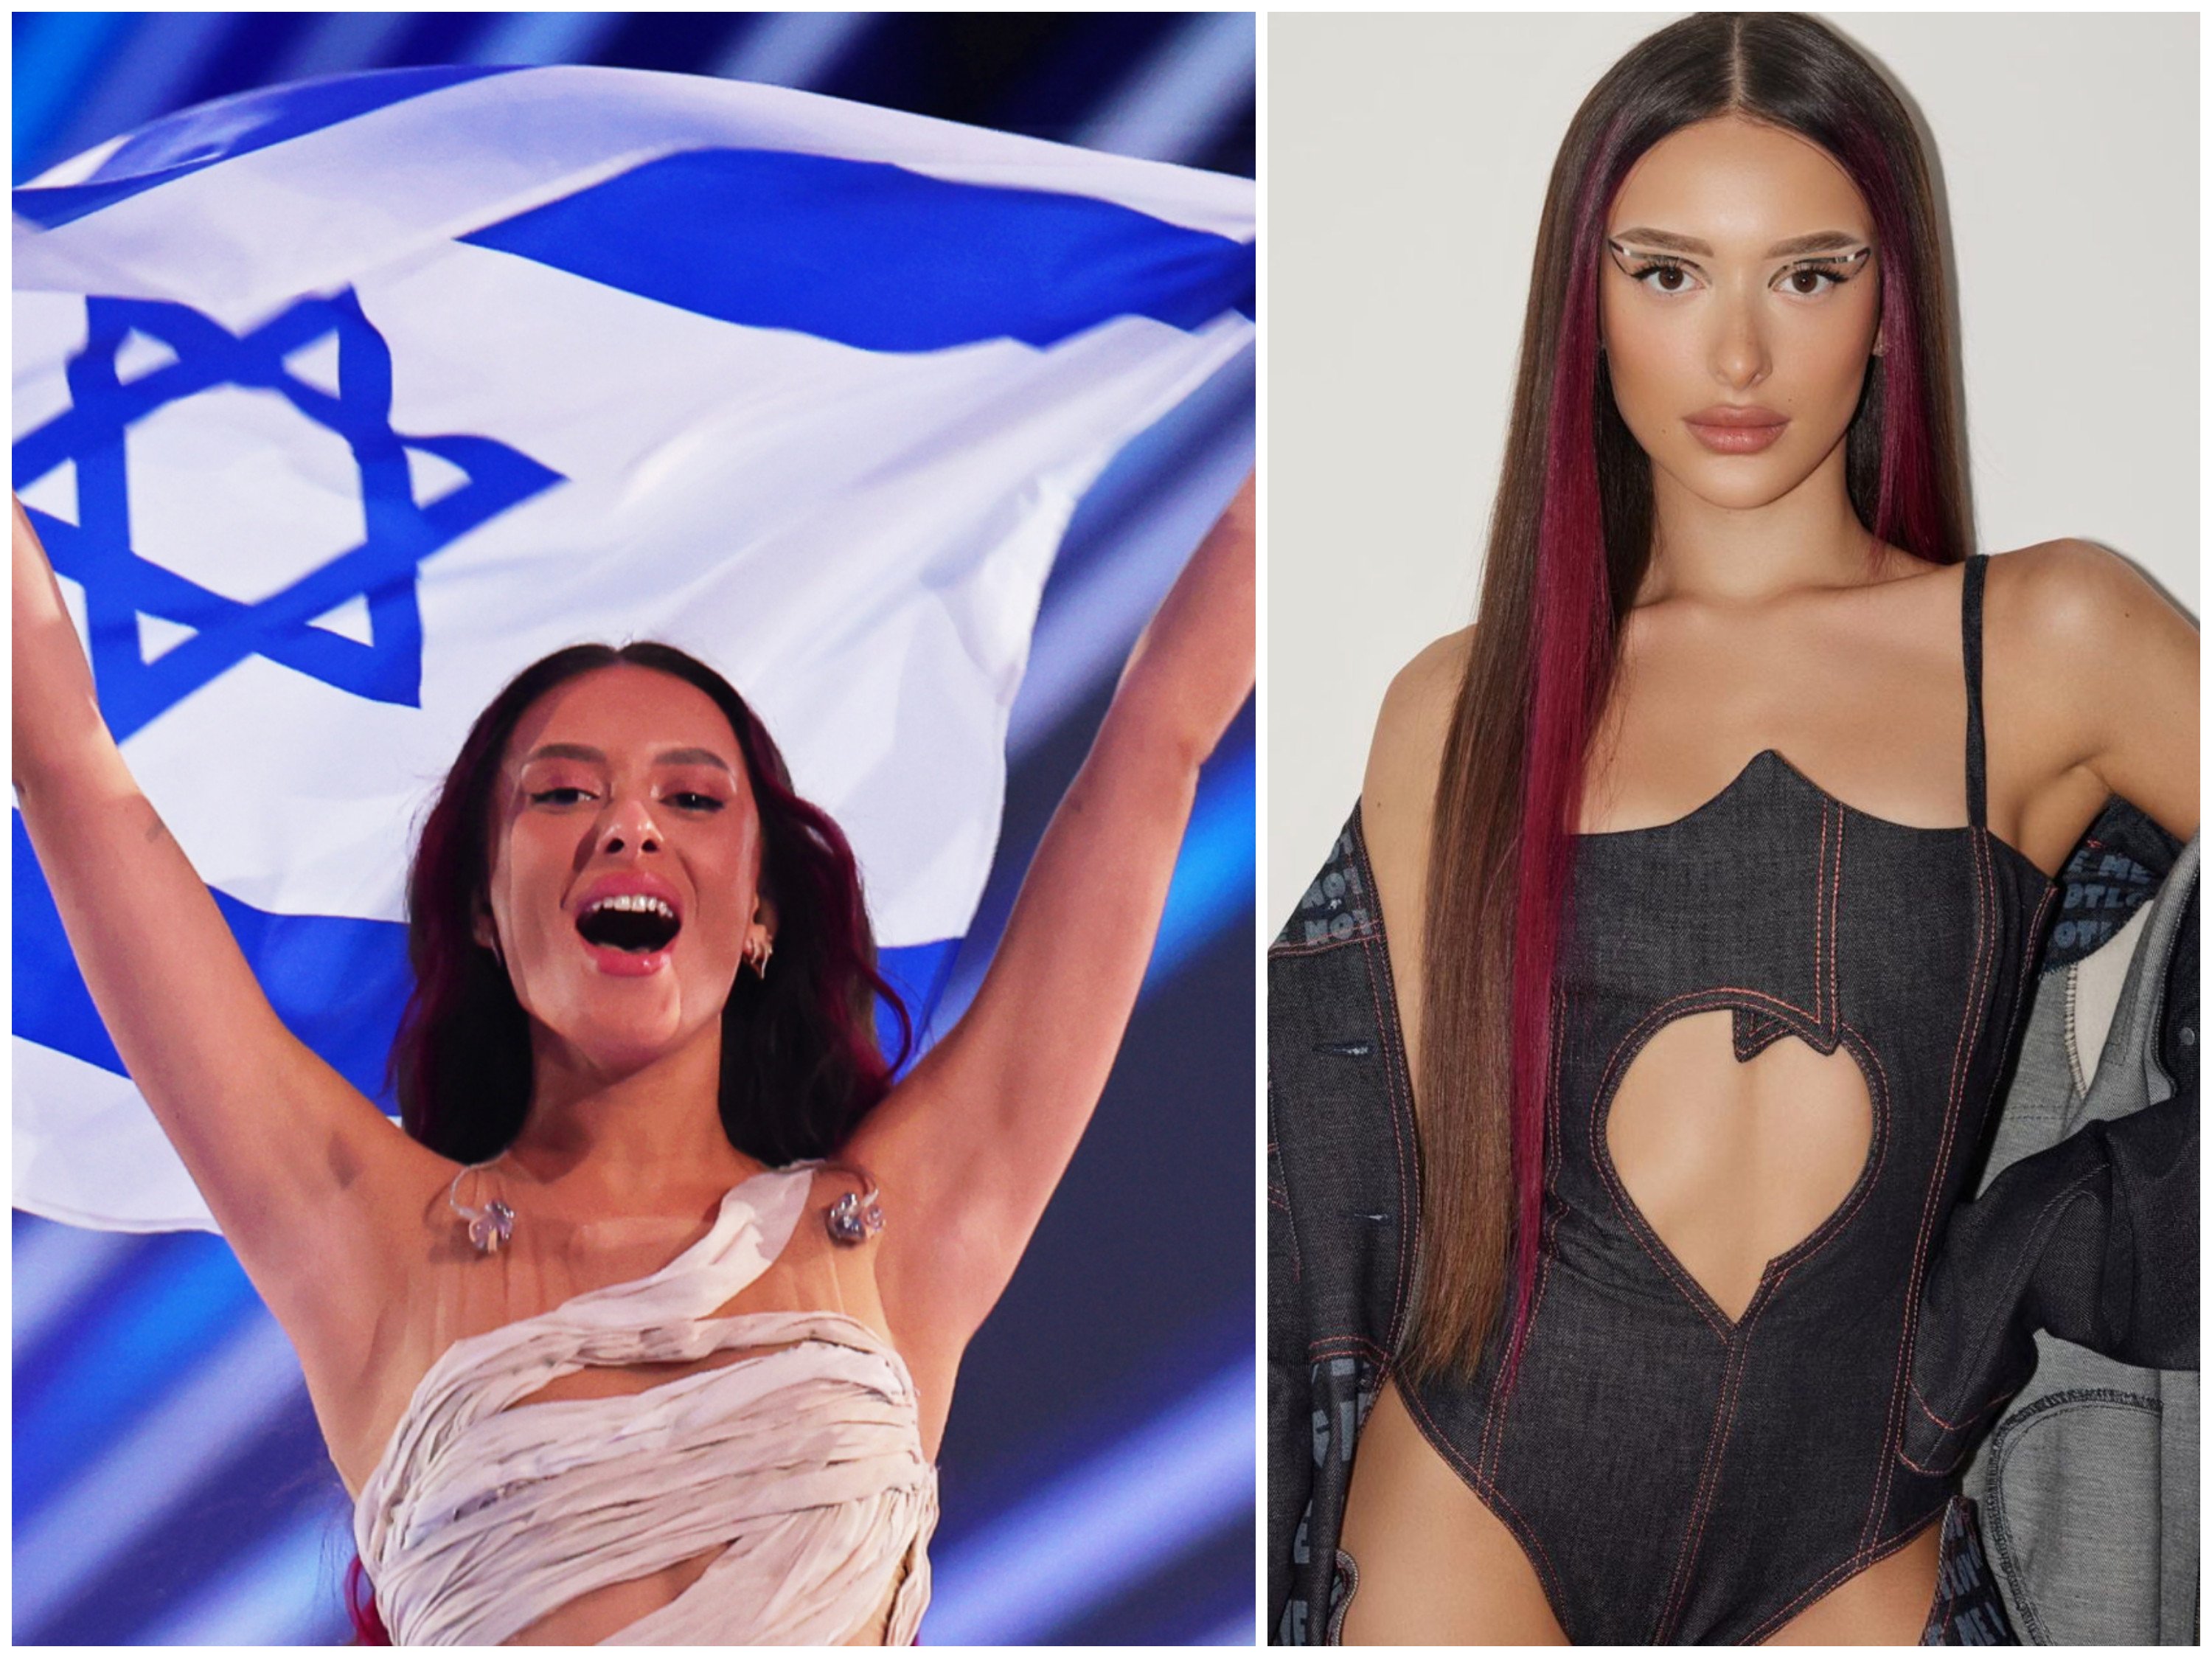 Eden Golan placed fifth at the Eurovision Song Contest, despite being booed during her performance. Photos: DPA, @golaneden/Instagram